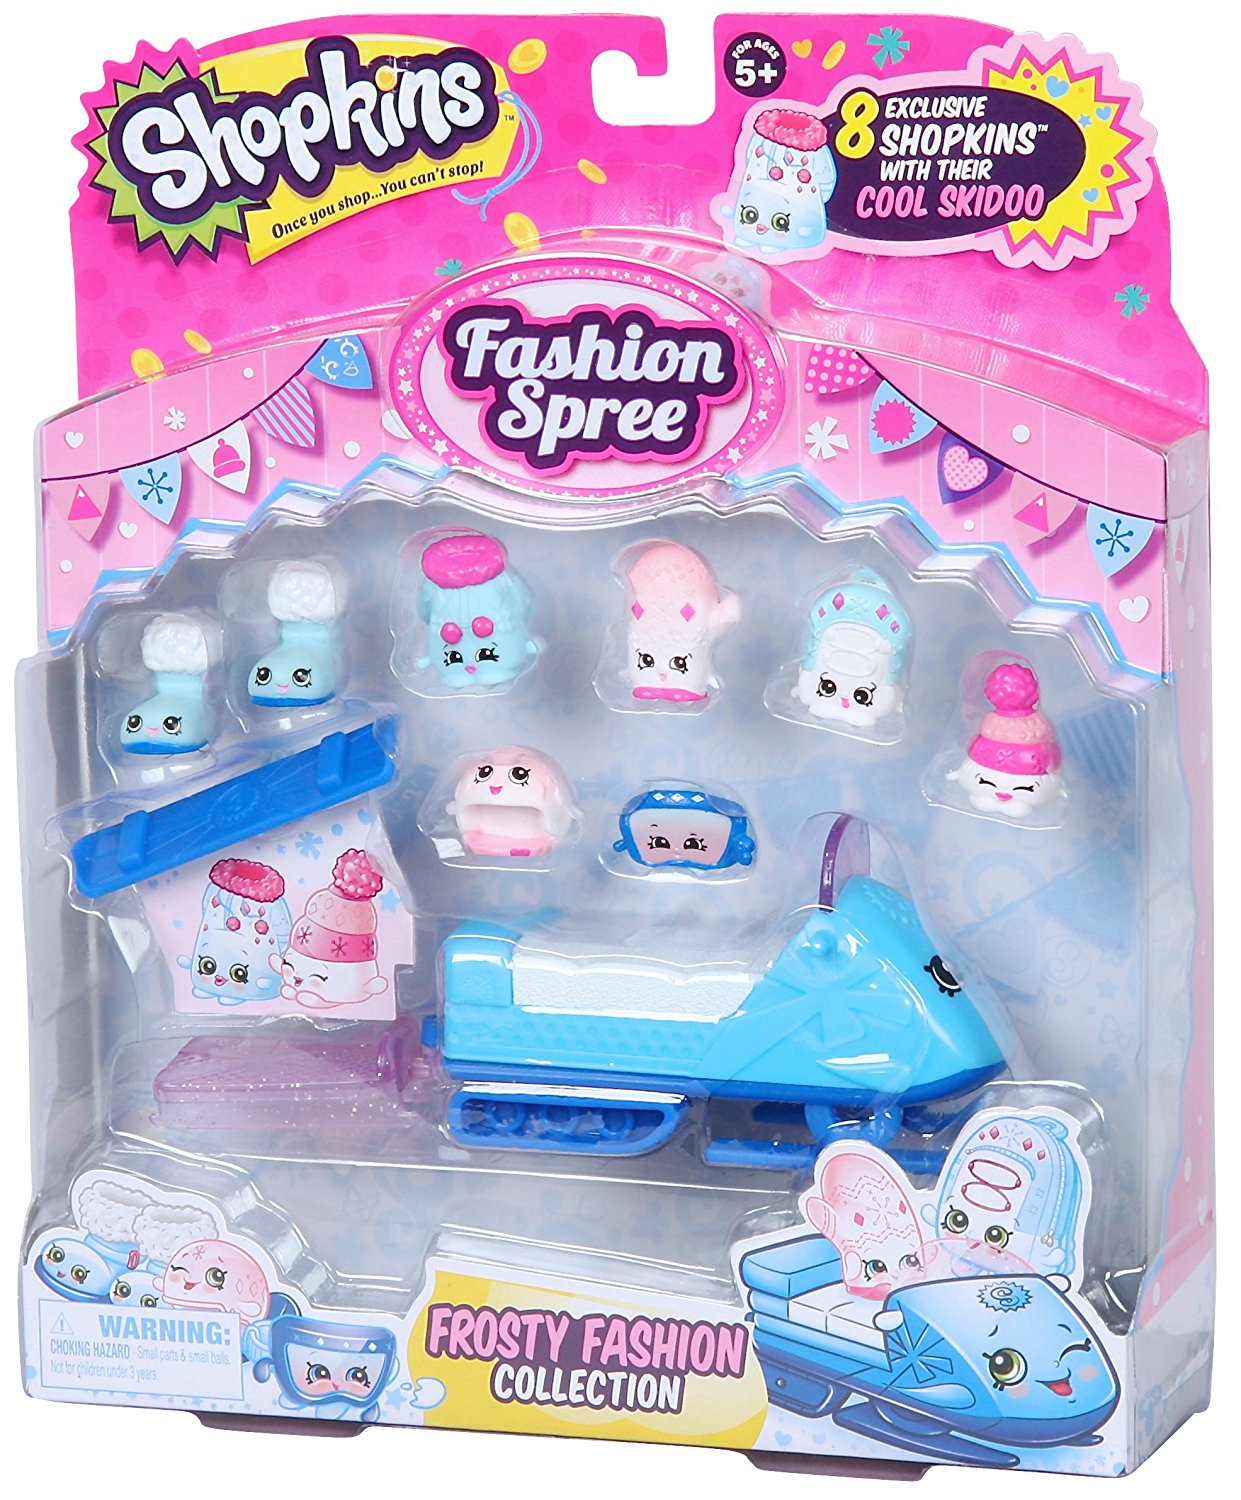 Shopkins Fashion Pack Frosty Fashion Collection – Just $5.58!